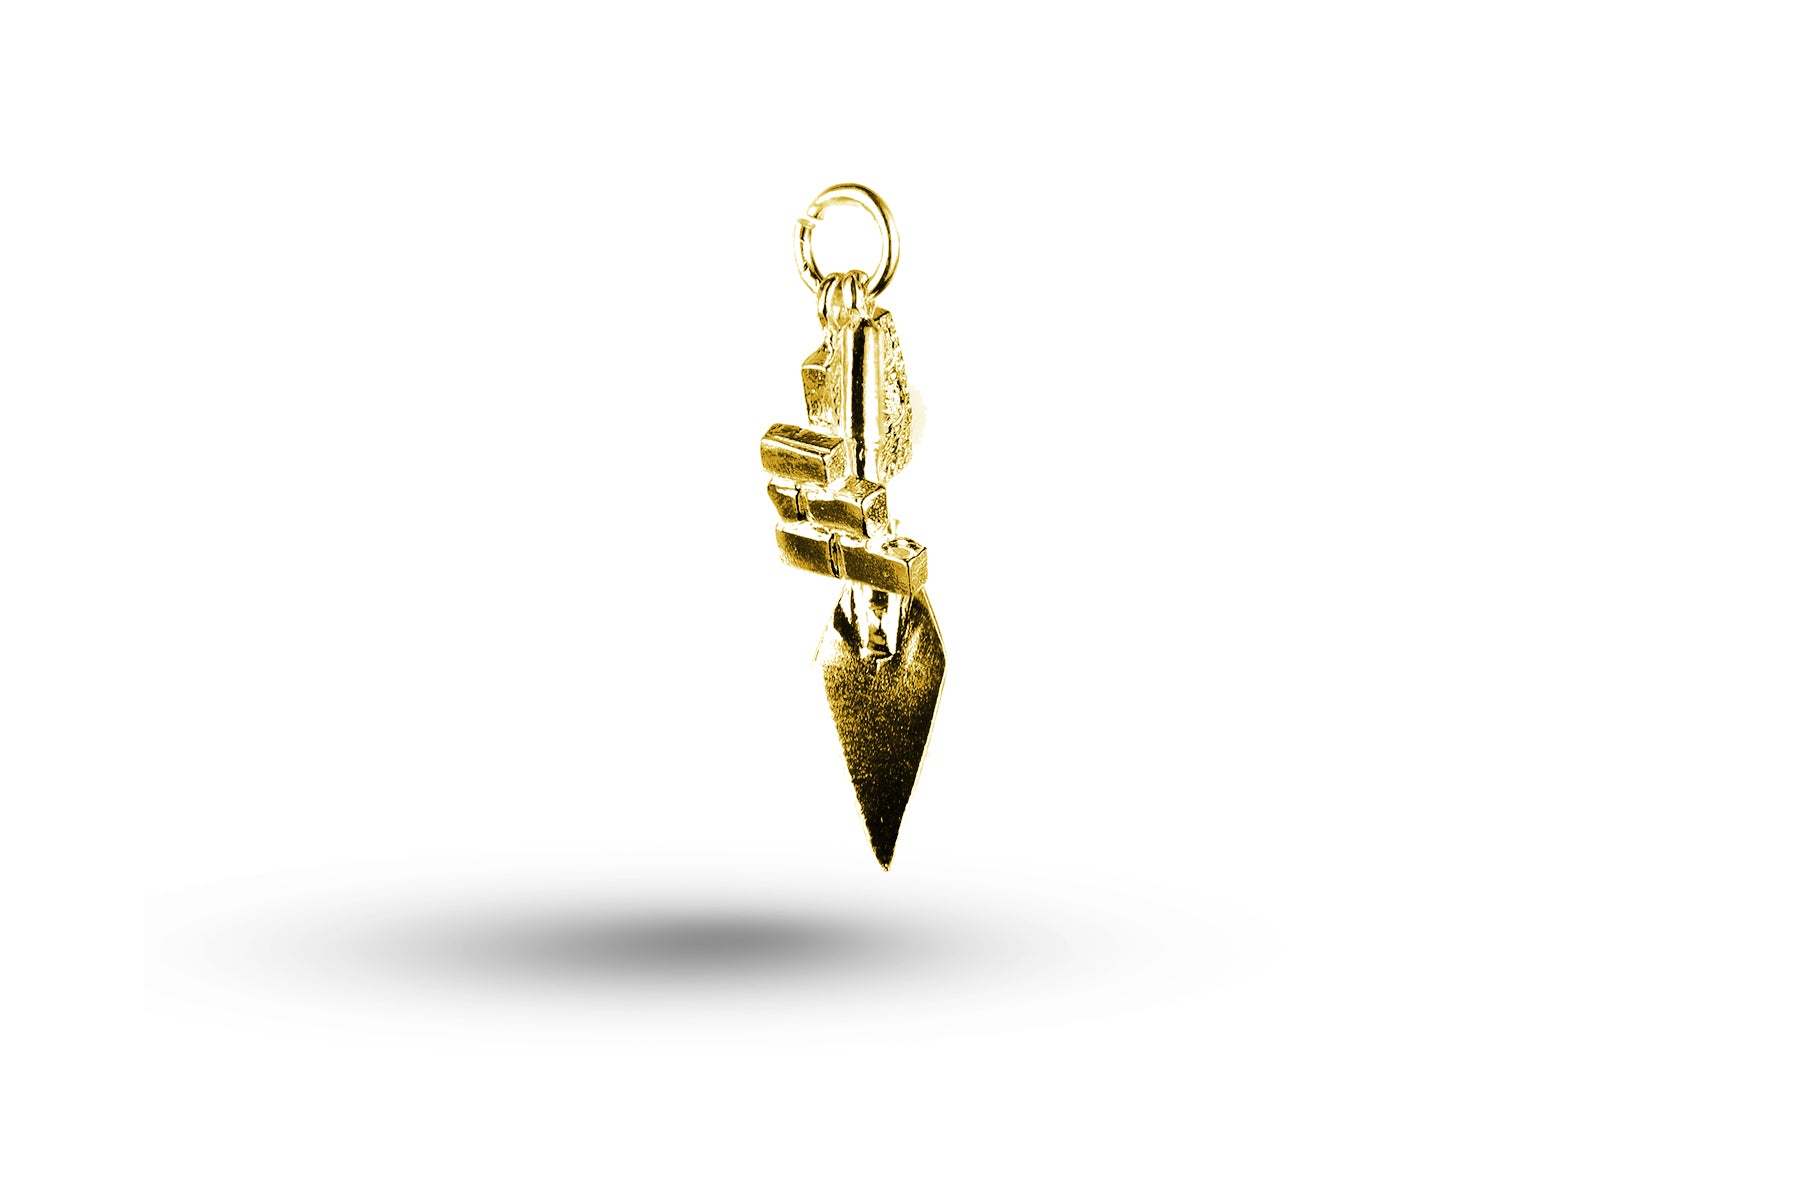 Yellow gold Trowel and Corner Building charm.